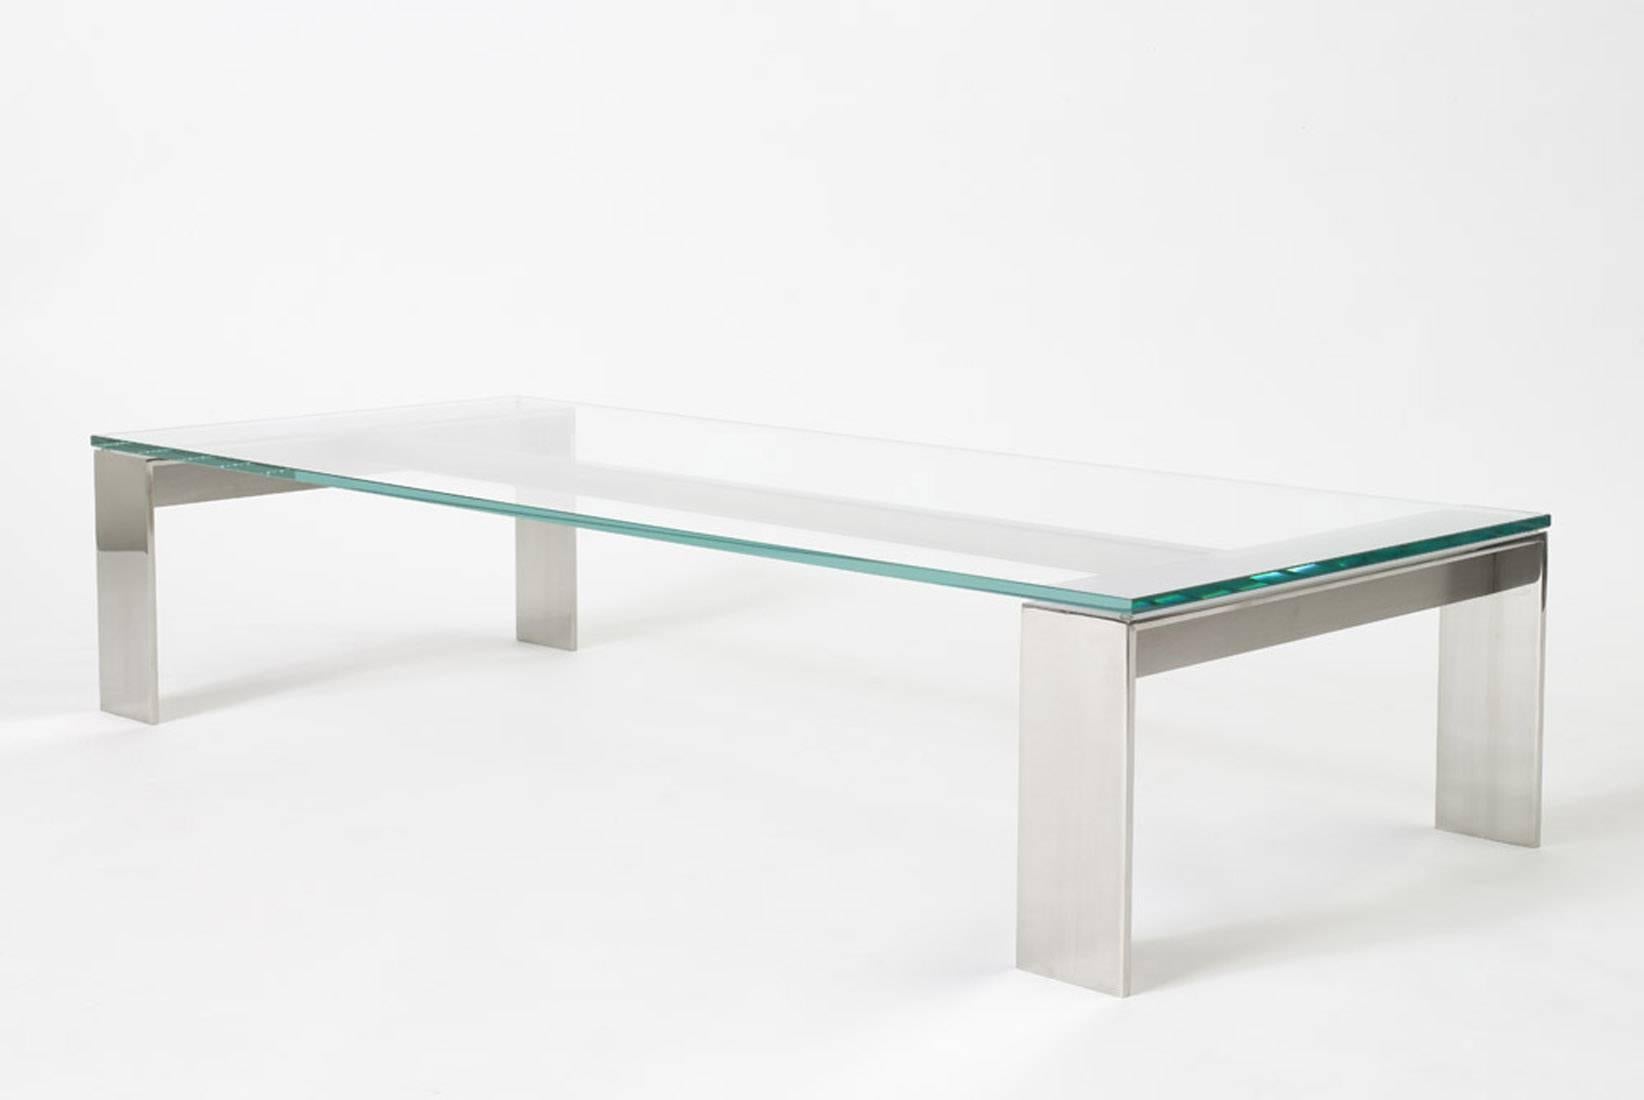 American Bridge Coffee Table Stainless Steel, Mirror Polished Finish with Clear Glass For Sale